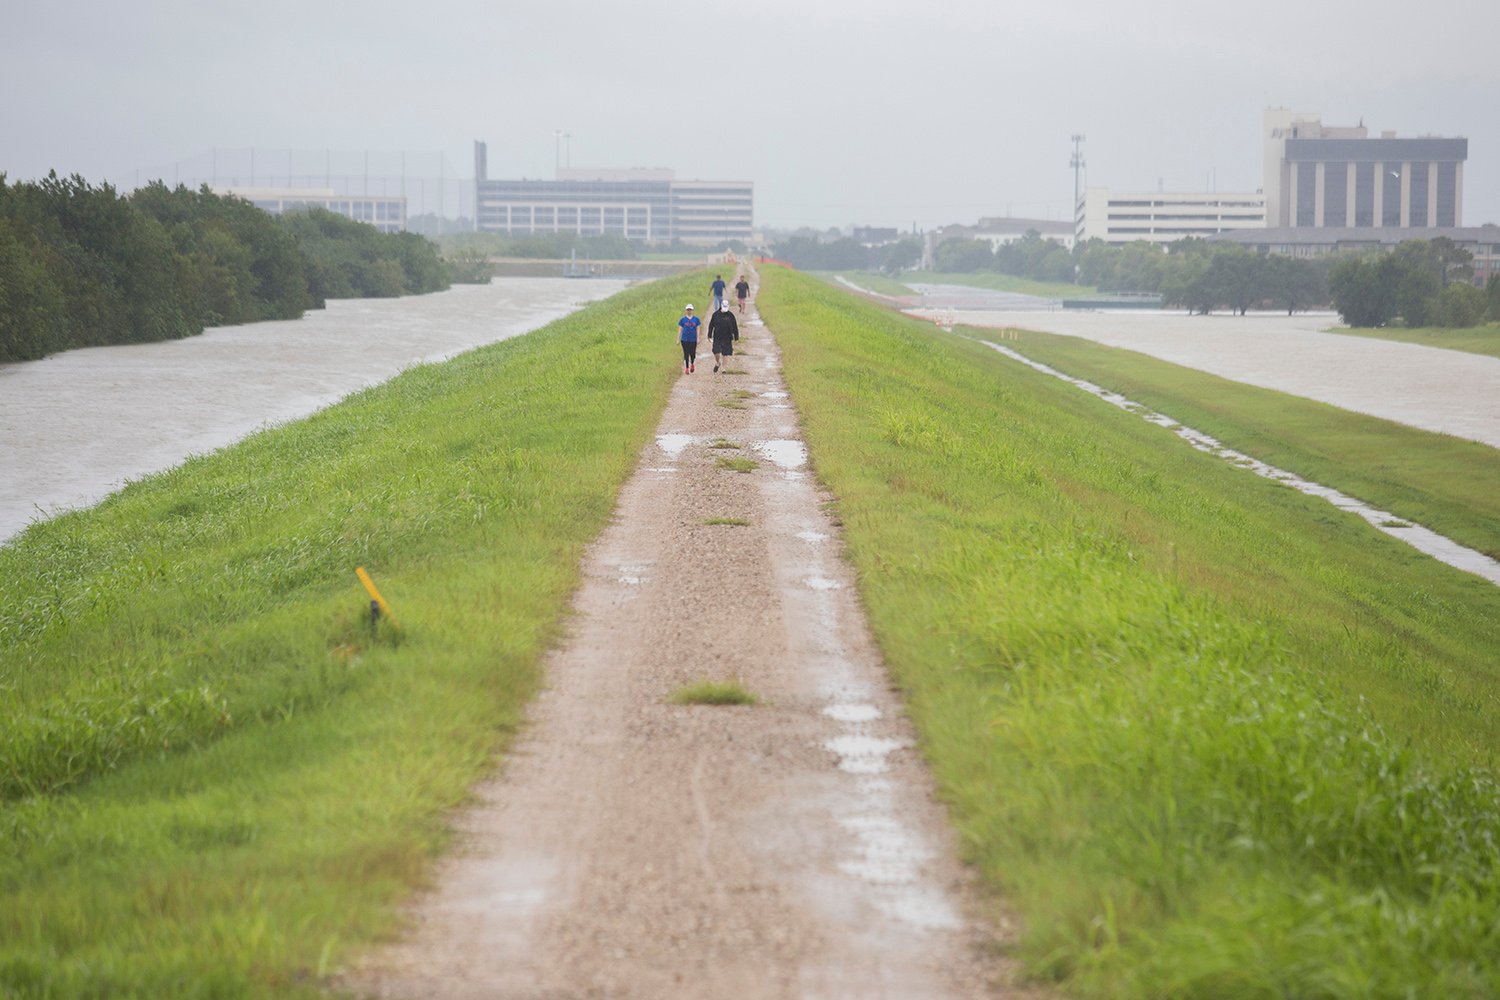 People walk along the Barker Reservoir Dam in Houston on Tuesday, Aug 29, 2017. Torrential rains from Hurricane Harvey caused the U.S. Army Corps of Engineers to release water from the reservoir, aggravating flooding in neighborhoods below the dam.